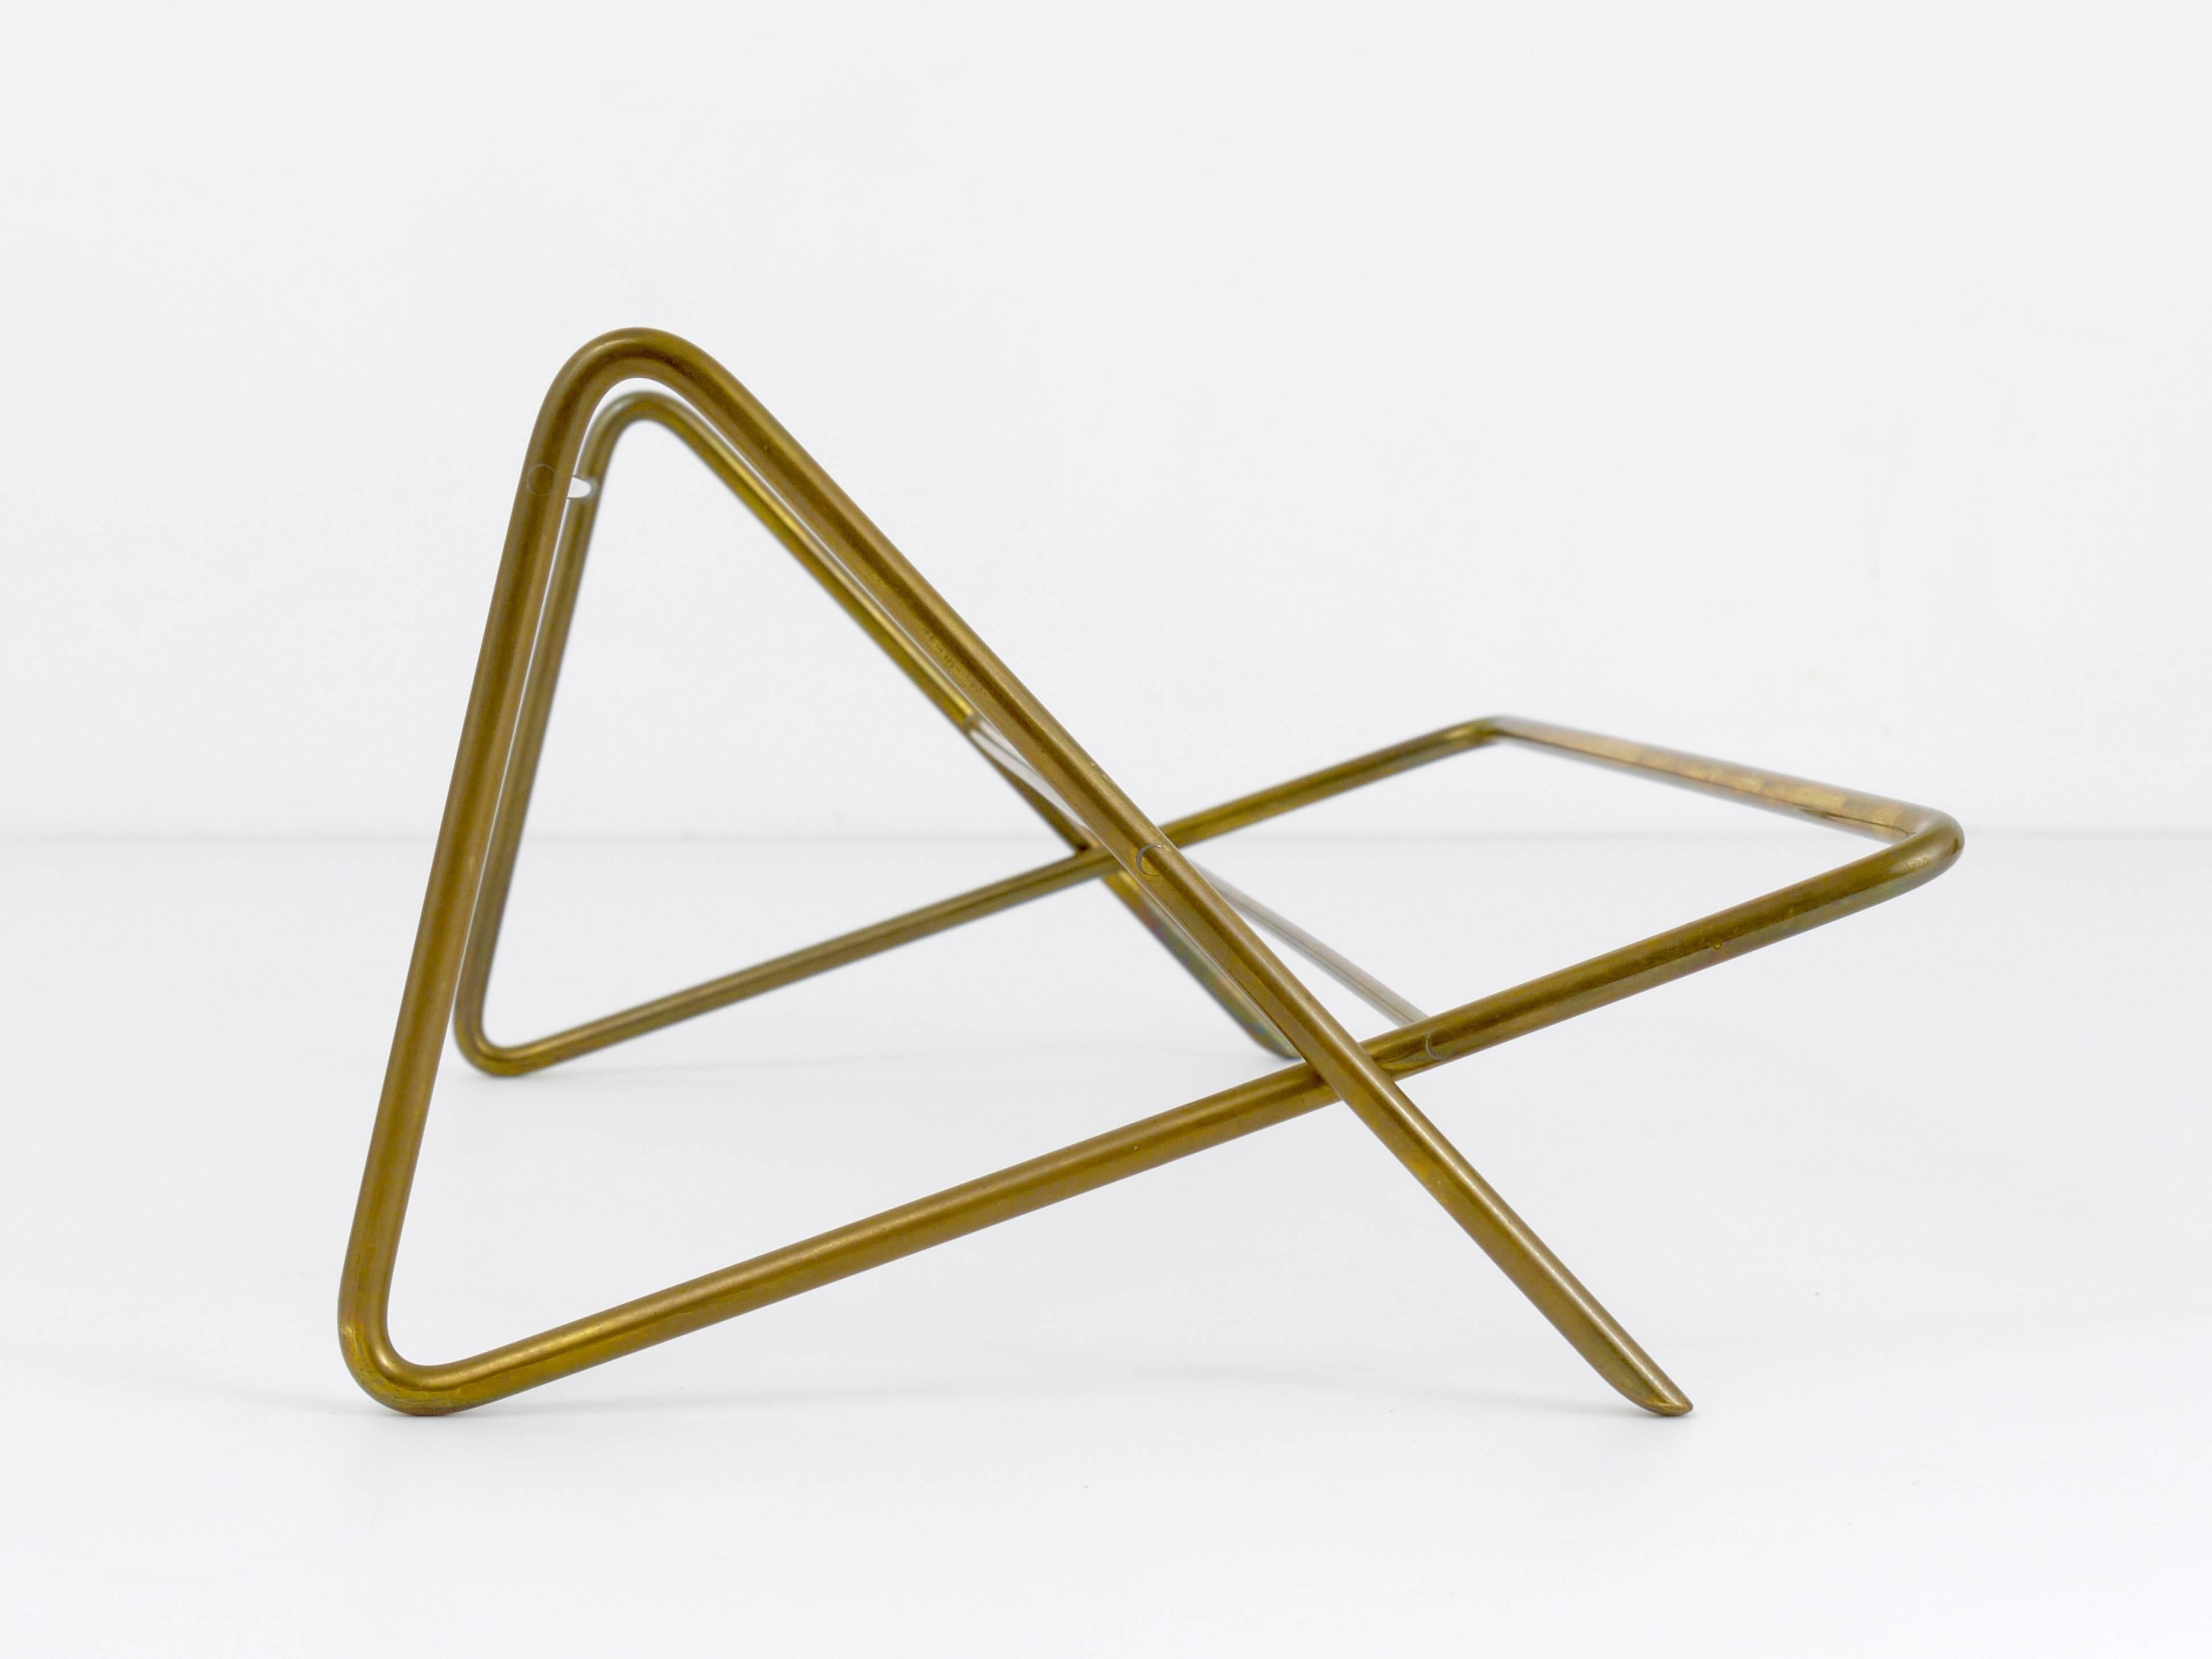 A beautiful modernist brass book stand, designed and executed by Carl Auböck, Austria, 1950s. In excellent condition with nice patina on the brass.